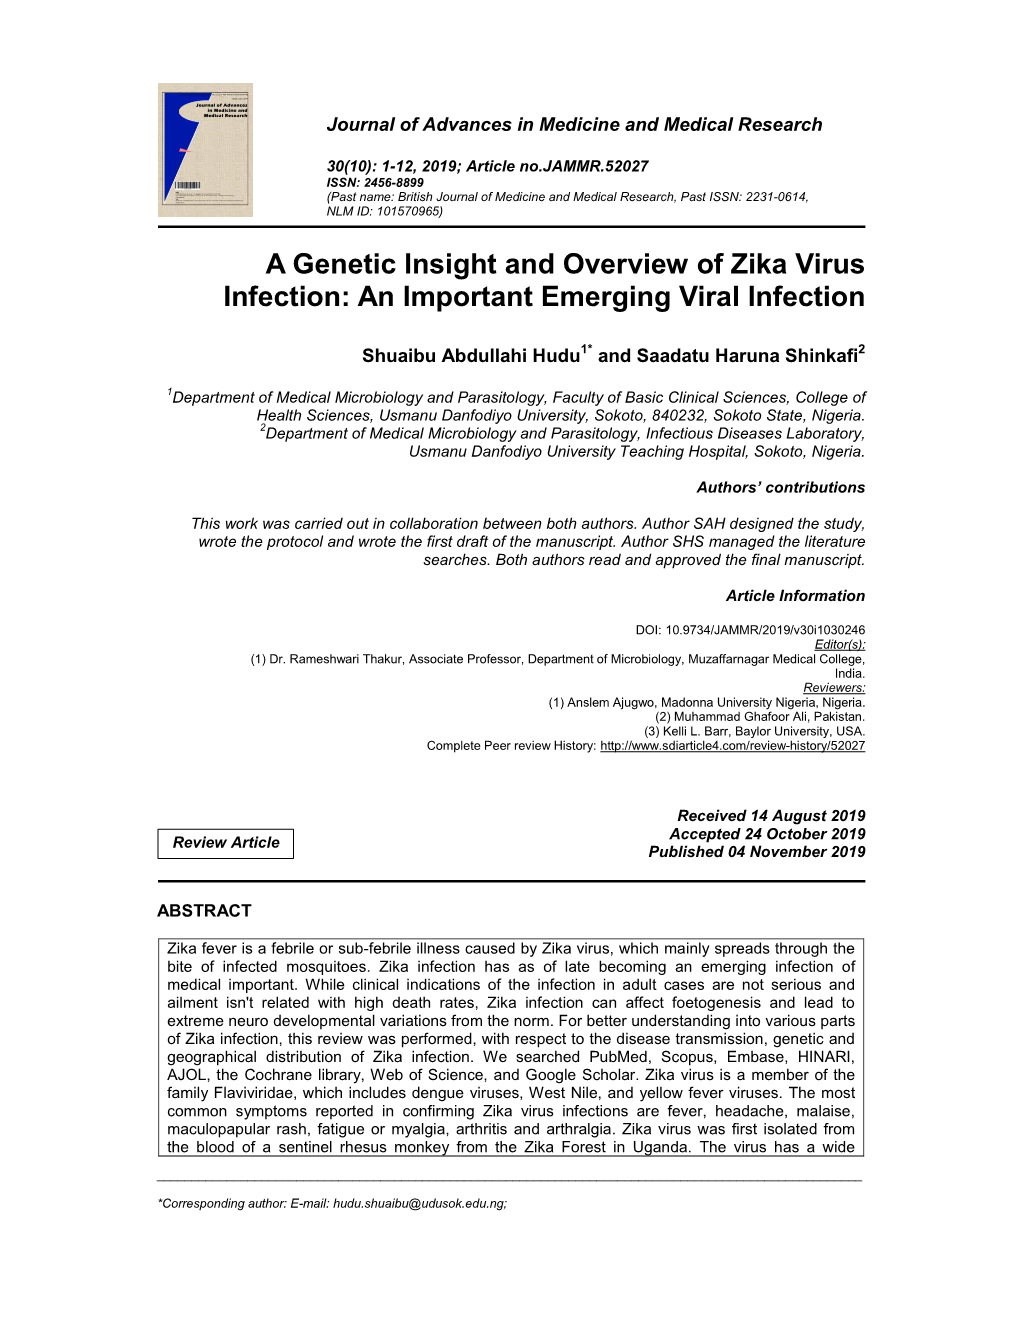 A Genetic Insight and Overview of Zika Virus Infection: an Important Emerging Viral Infection